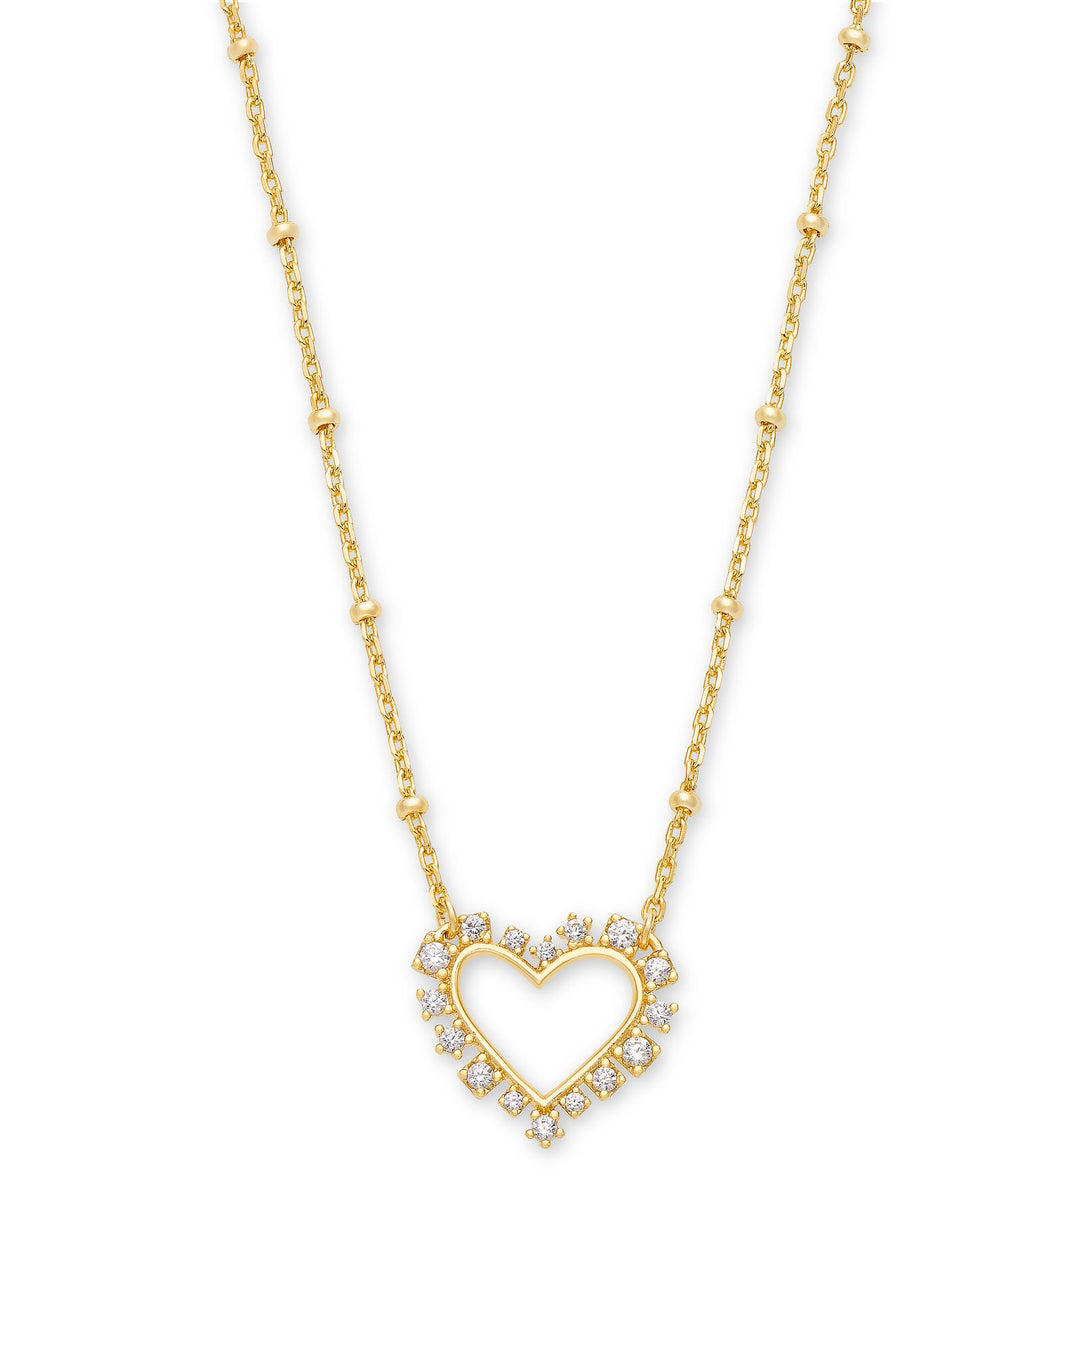 Kendra Scott Ari Heart Crystal Pendant Necklace in Gold White Crystal